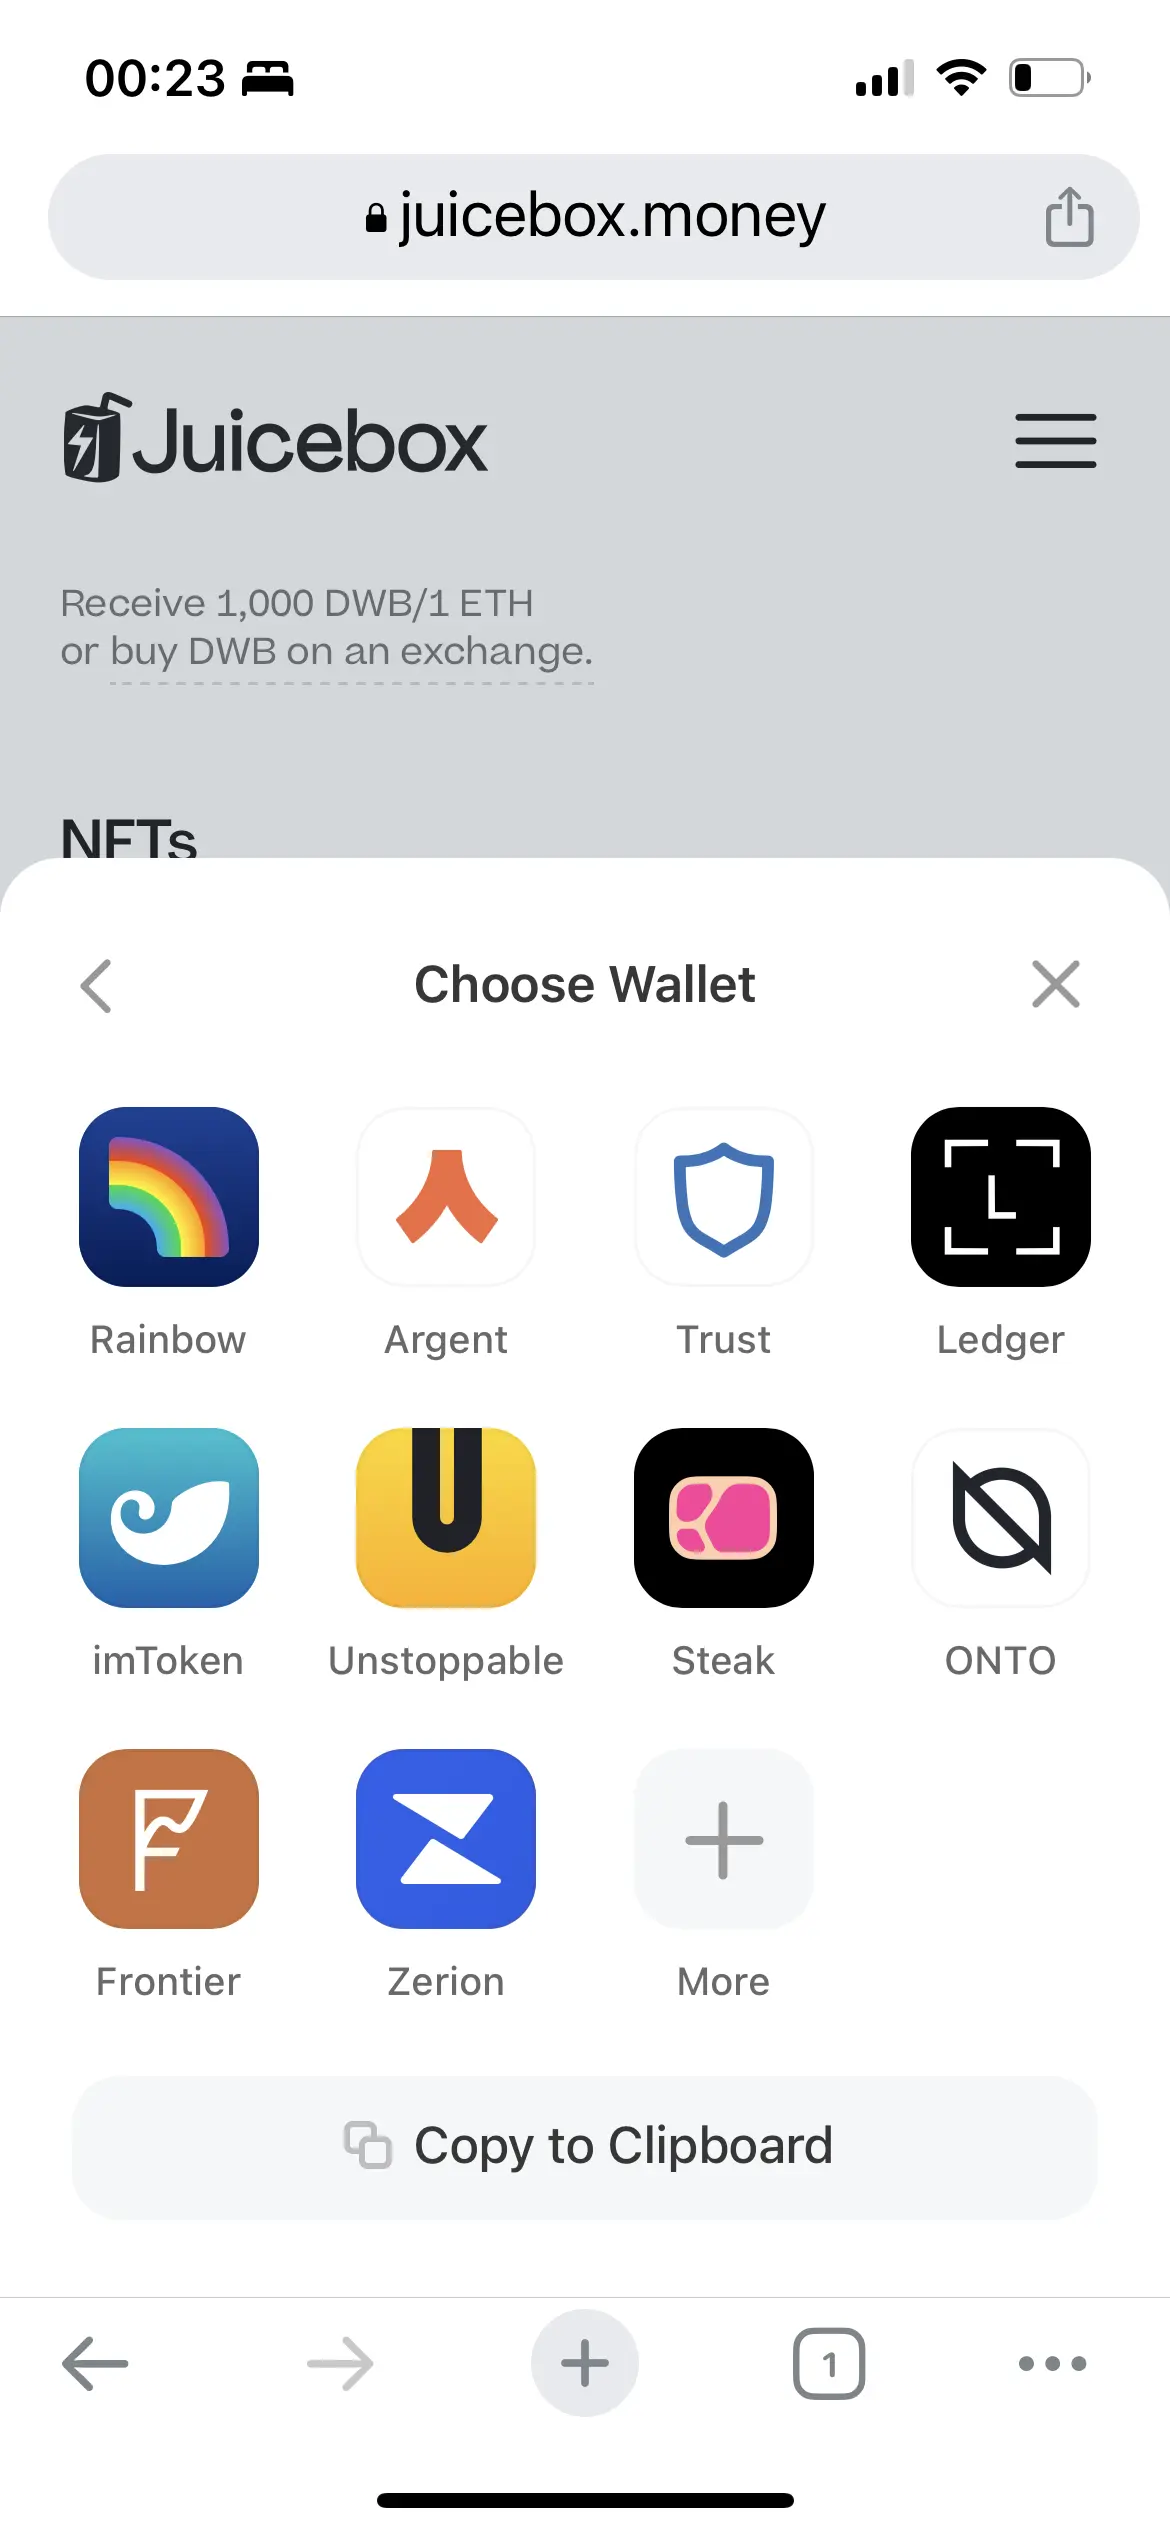 connect wallet interface on mobile